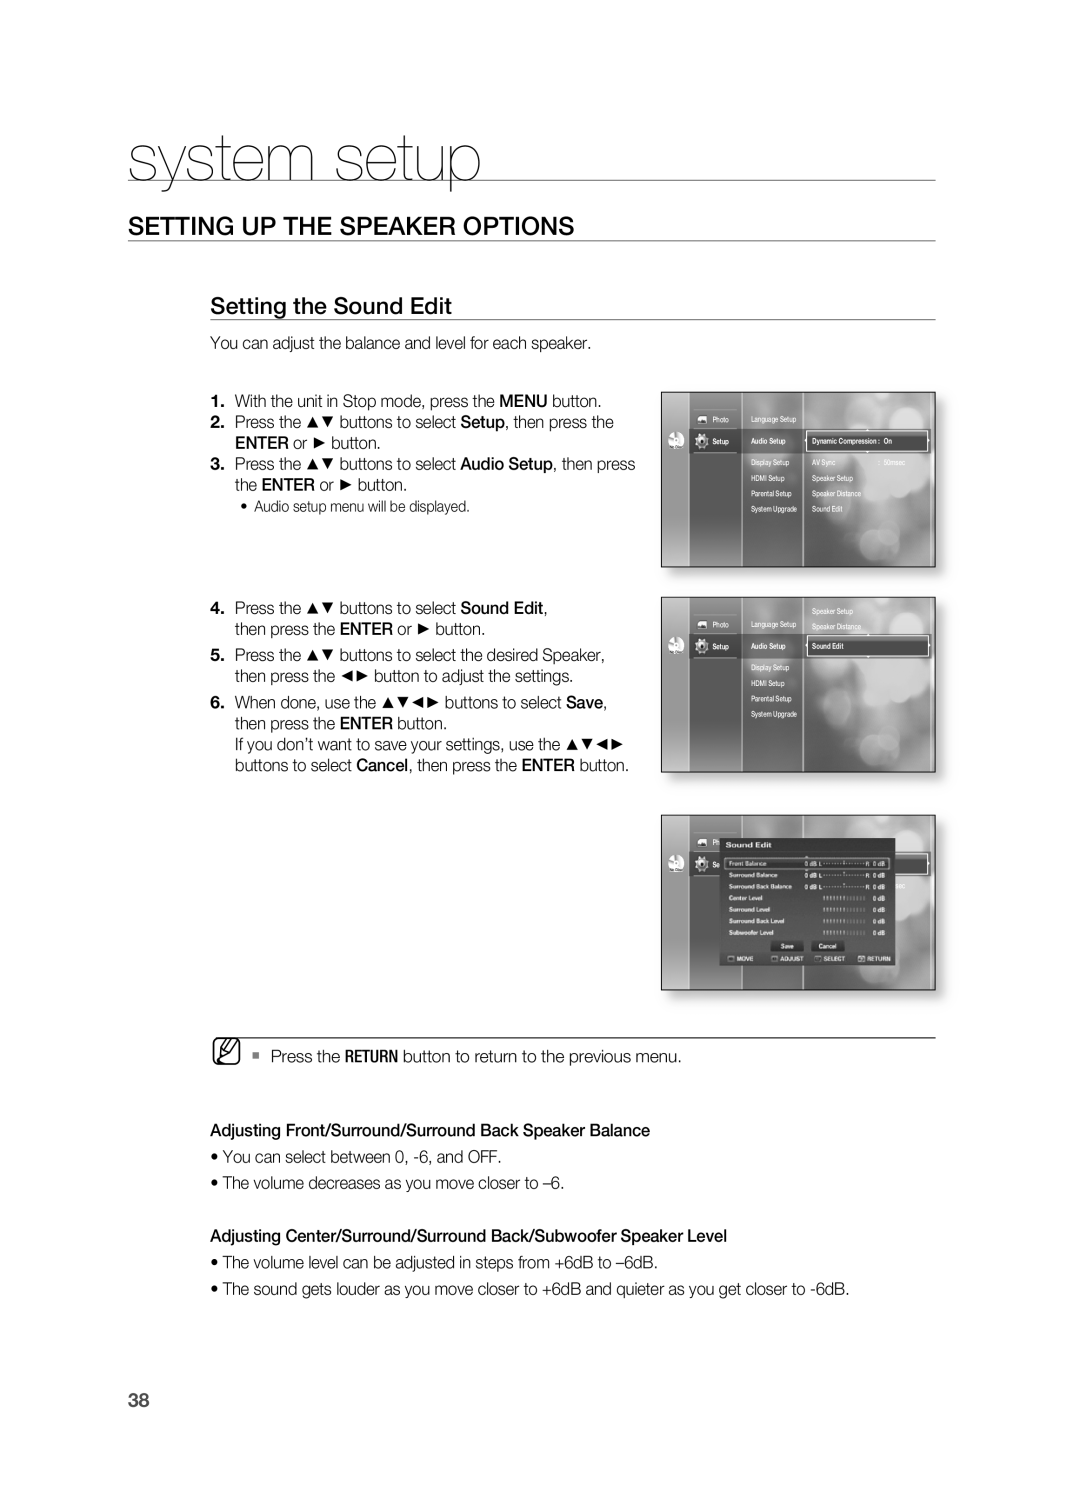 Samsung AH68-02019S manual Setting the Sound Edit, system setup, SETTIng UP THE SPEAKER OPTIOnS 